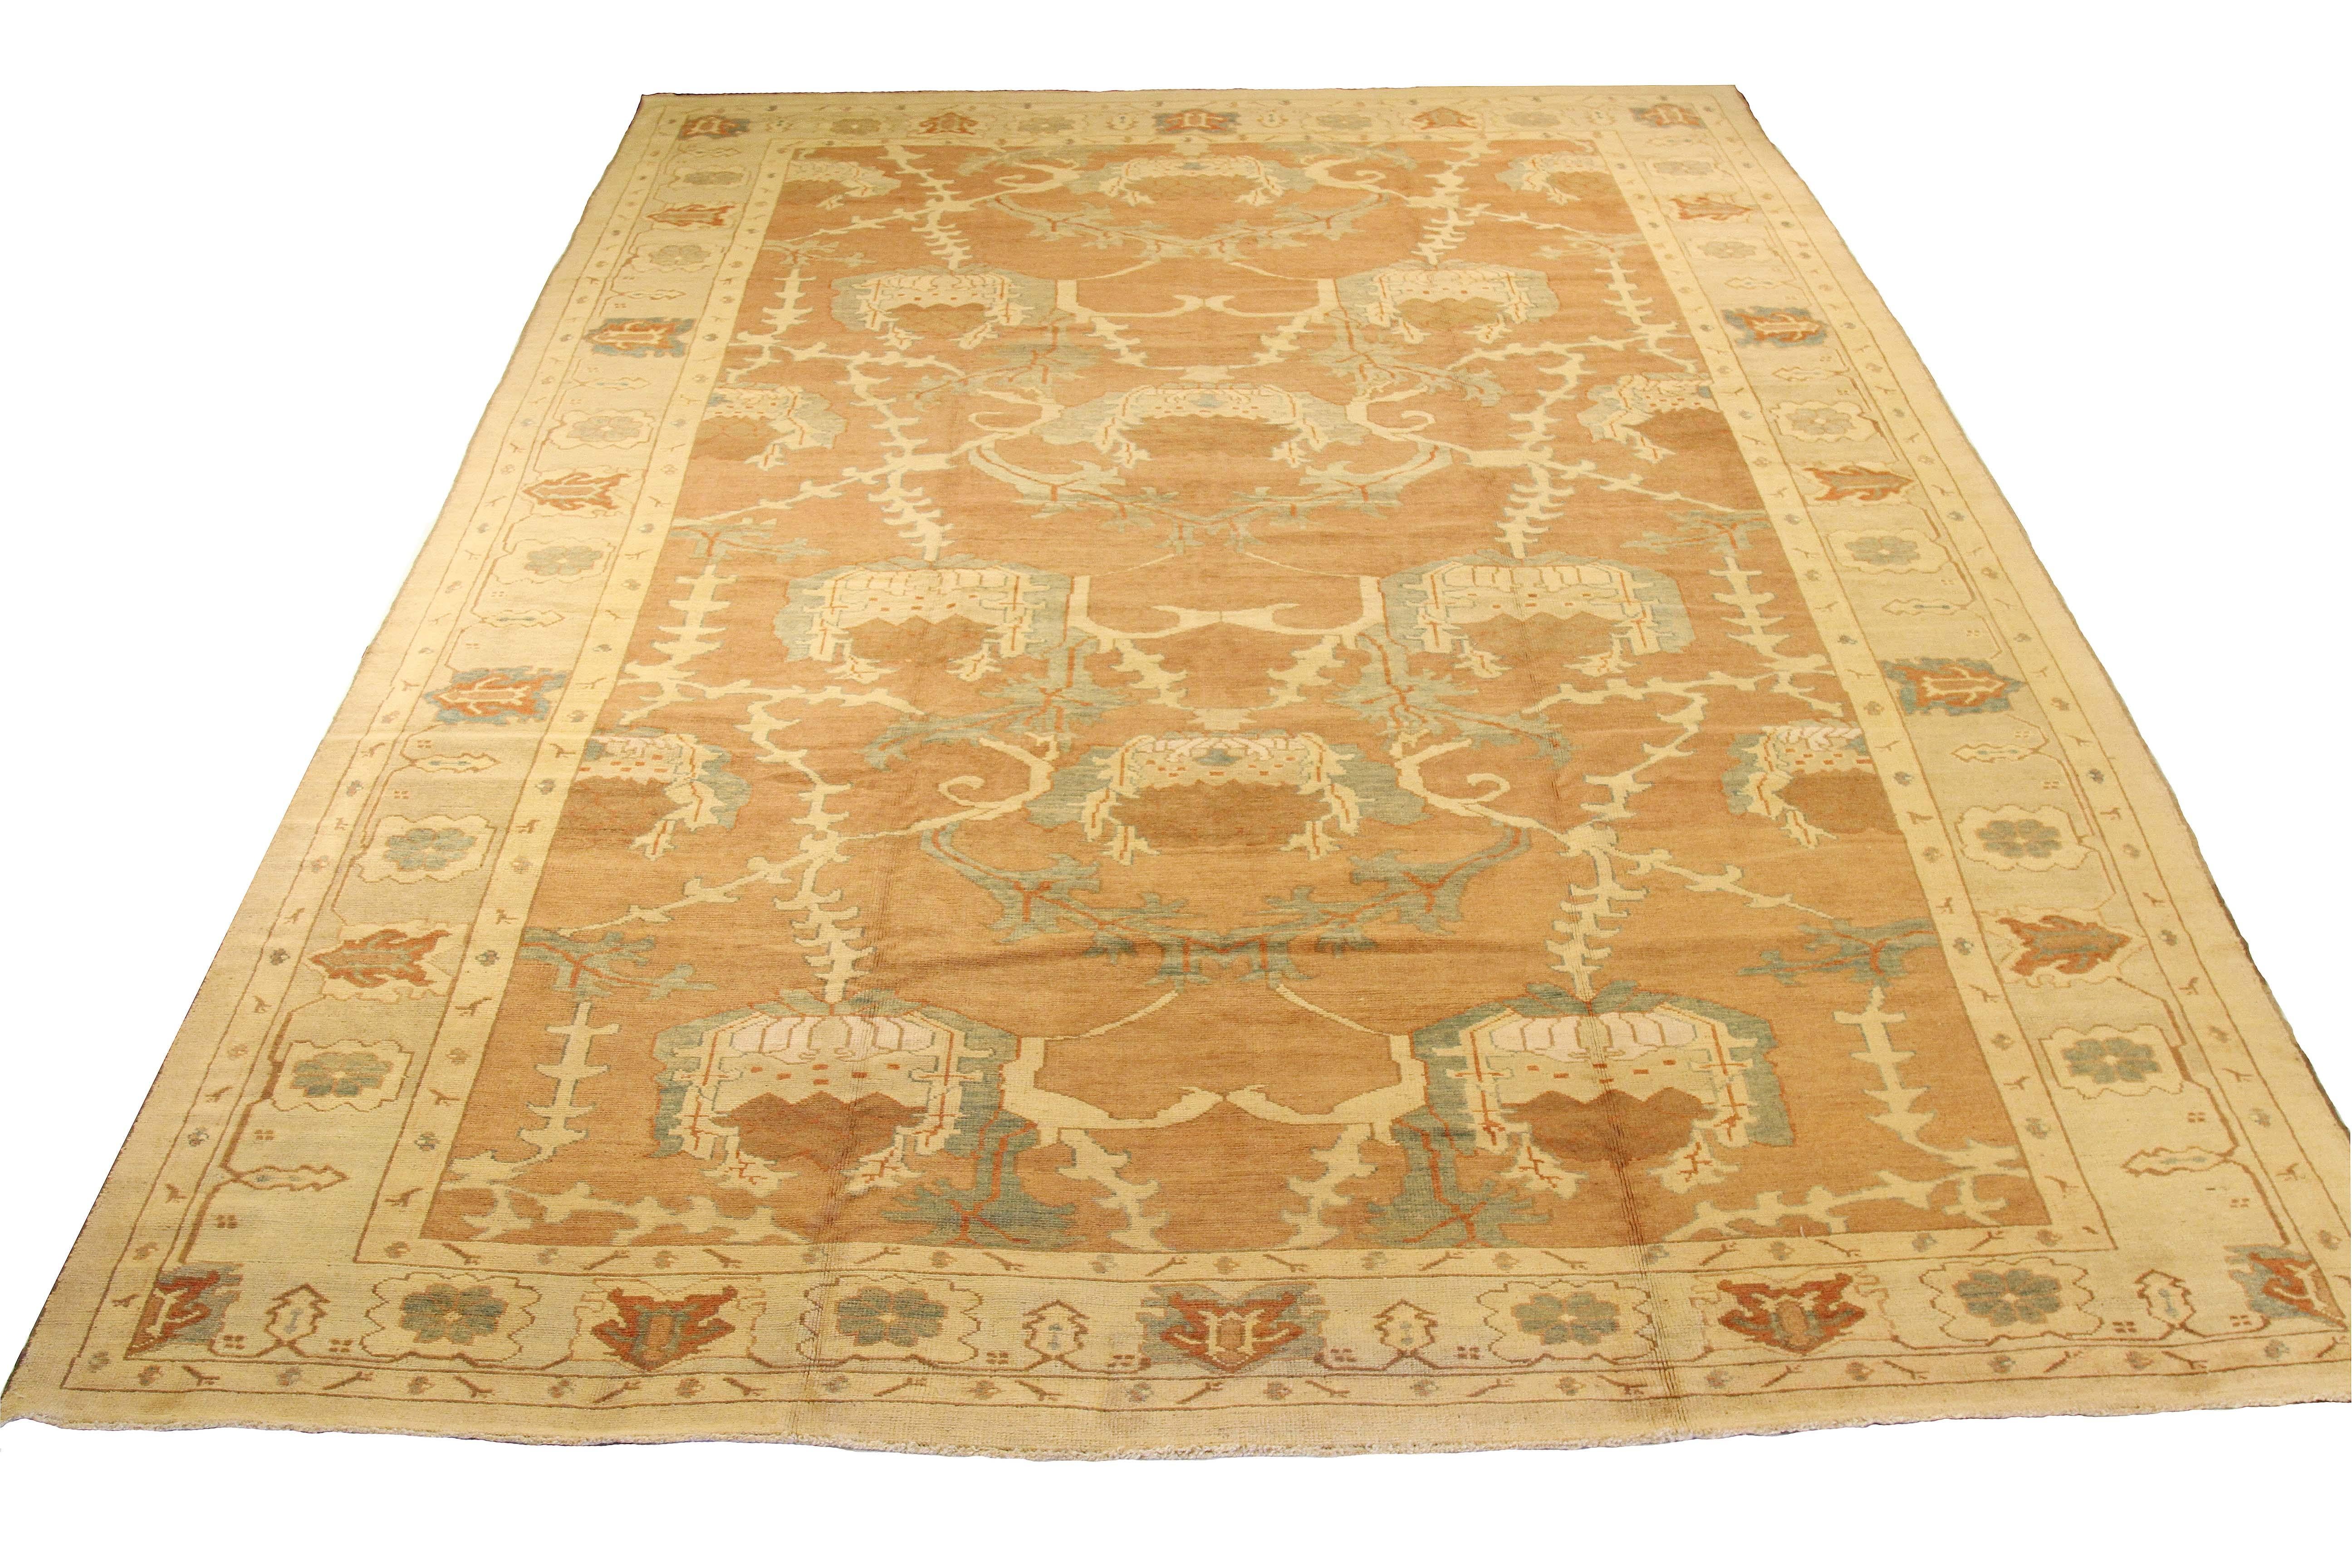 Large and oversized handmade Turkish rug from high-quality sheep’s wool and colored with eco-friendly vegetable dyes that are proven safe for humans and pets alike. It’s a Donegal design showcasing a brown and ivory field with gray and red botanical